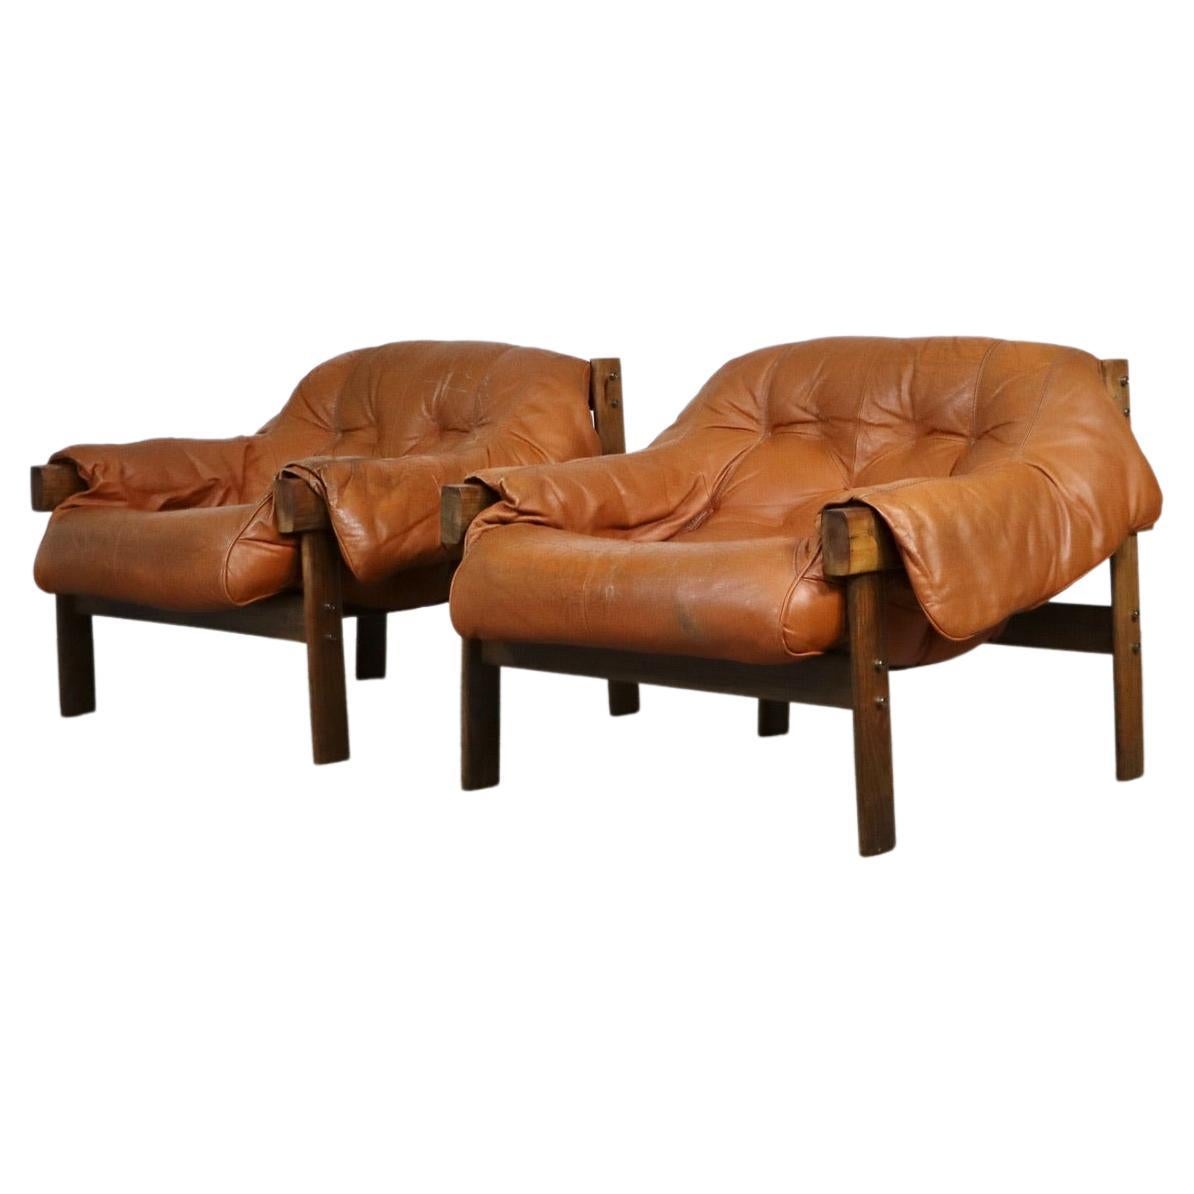 Pair of Percival Lafer MP-41 Lounge Chairs in Cognac Leather, Brazil, 1970s